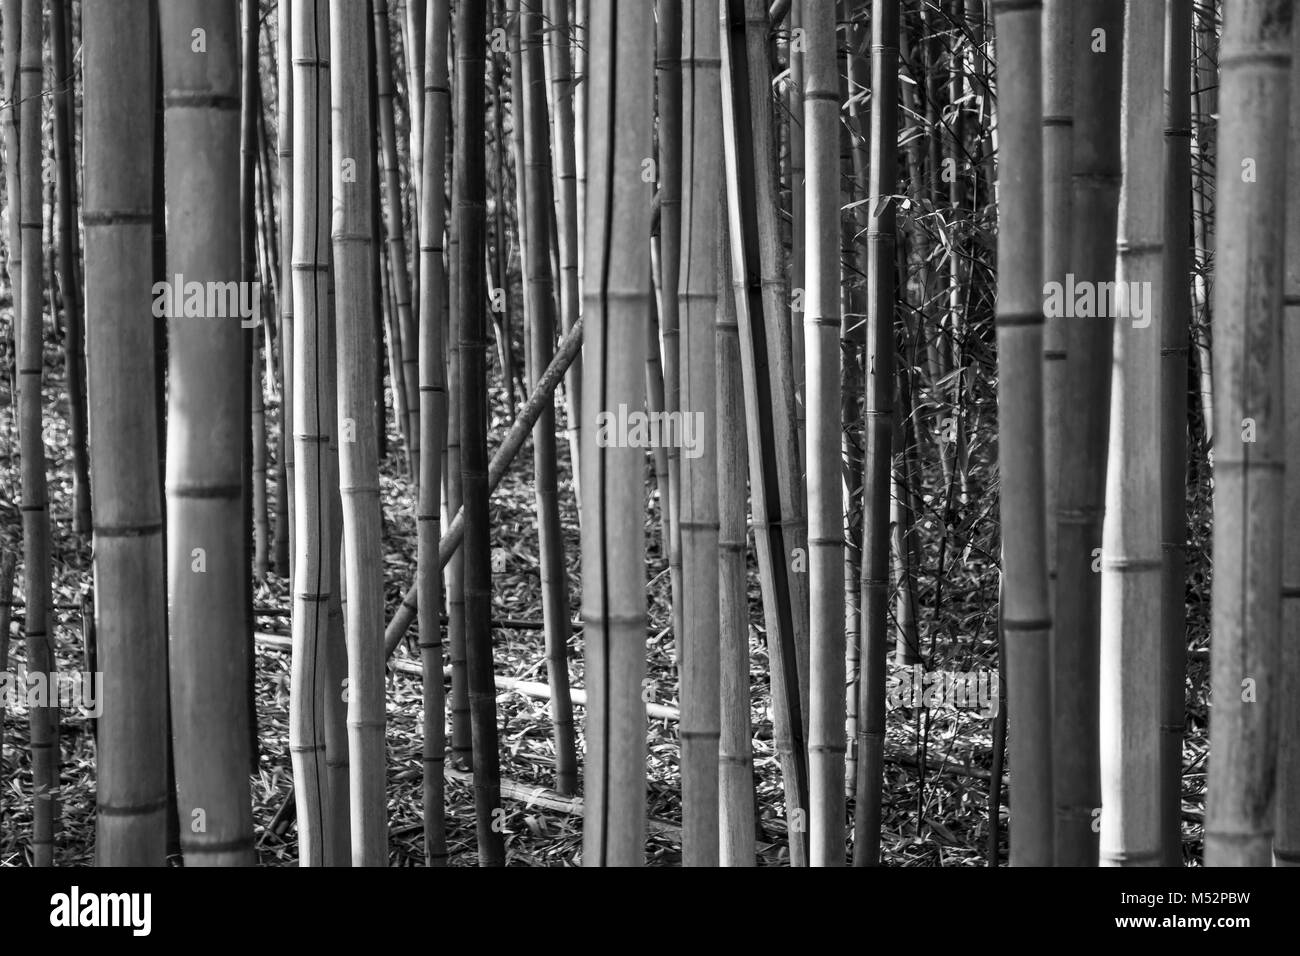 A dense bamboo forest in the unlikely Alabama wilderness Stock Photo